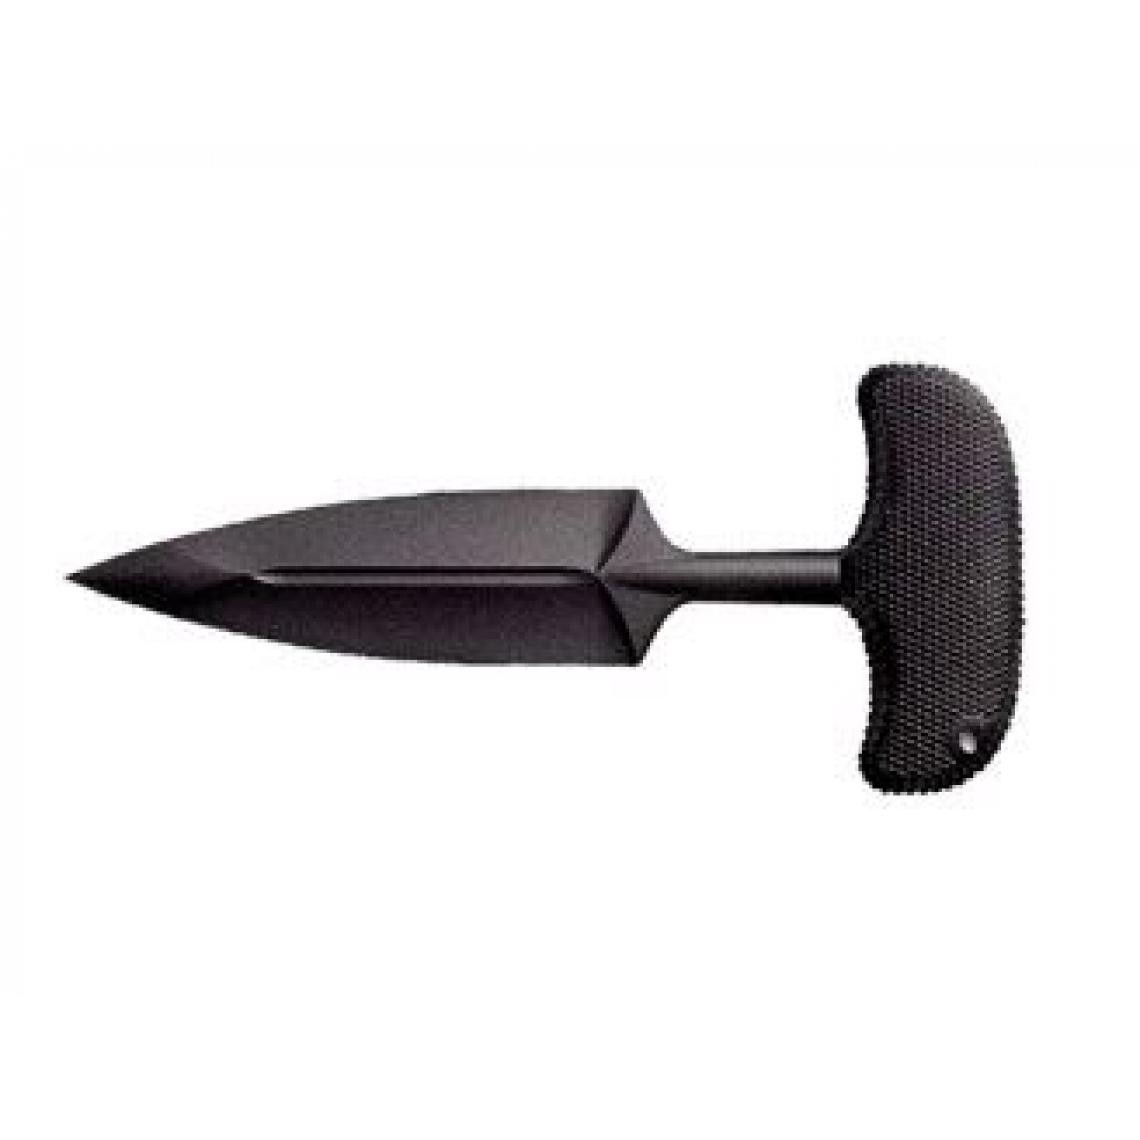 Divers Marques - Cold Steel FGX PUSH BLADE I 92FPA - Outils de coupe